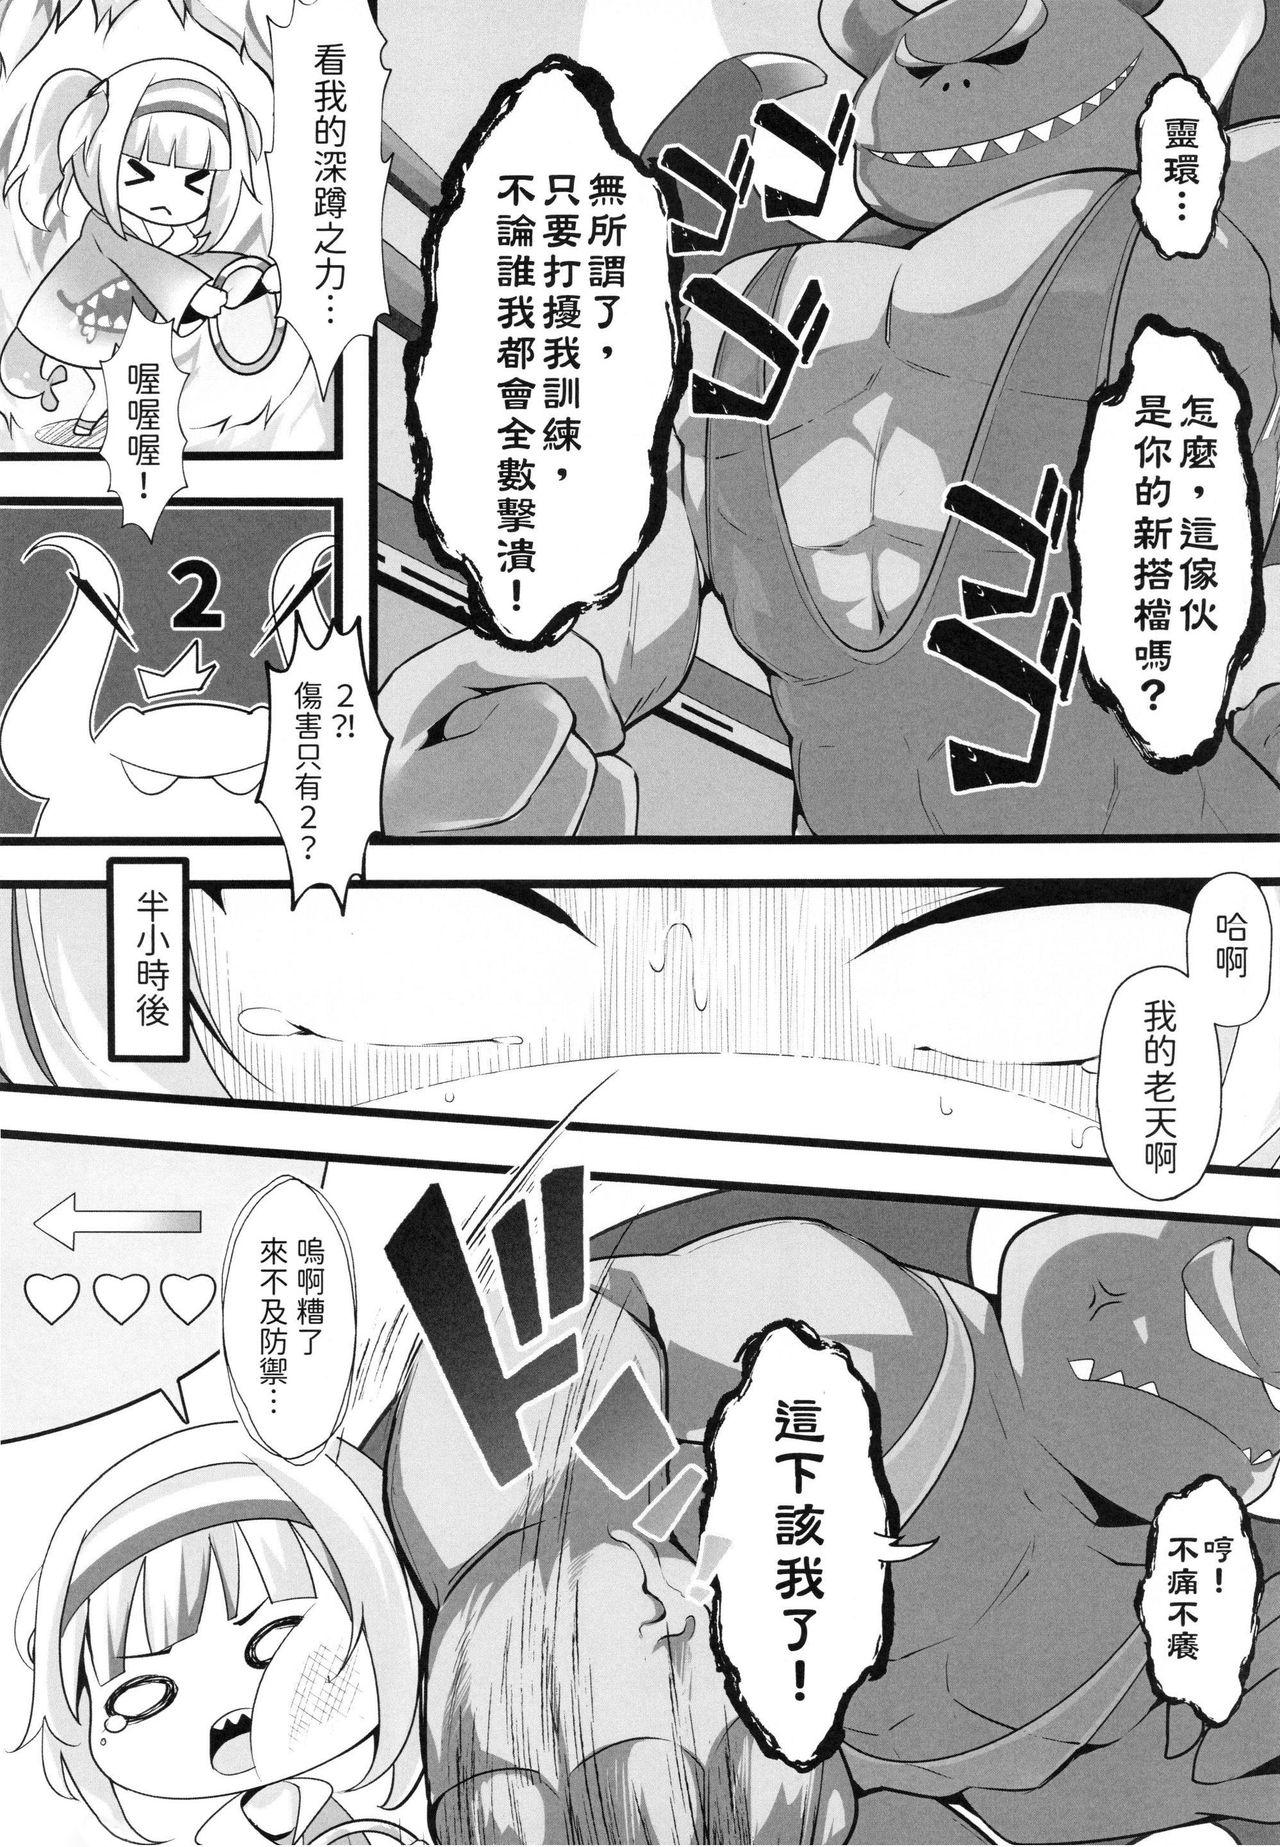 Stepbrother 【台灣FF37】[ちやみ] Let's Sweat (hololive) (Gawr Gura) (Vtuber) [Chinese] [Decensored] - Hololive Ring fit adventure Groping - Page 5